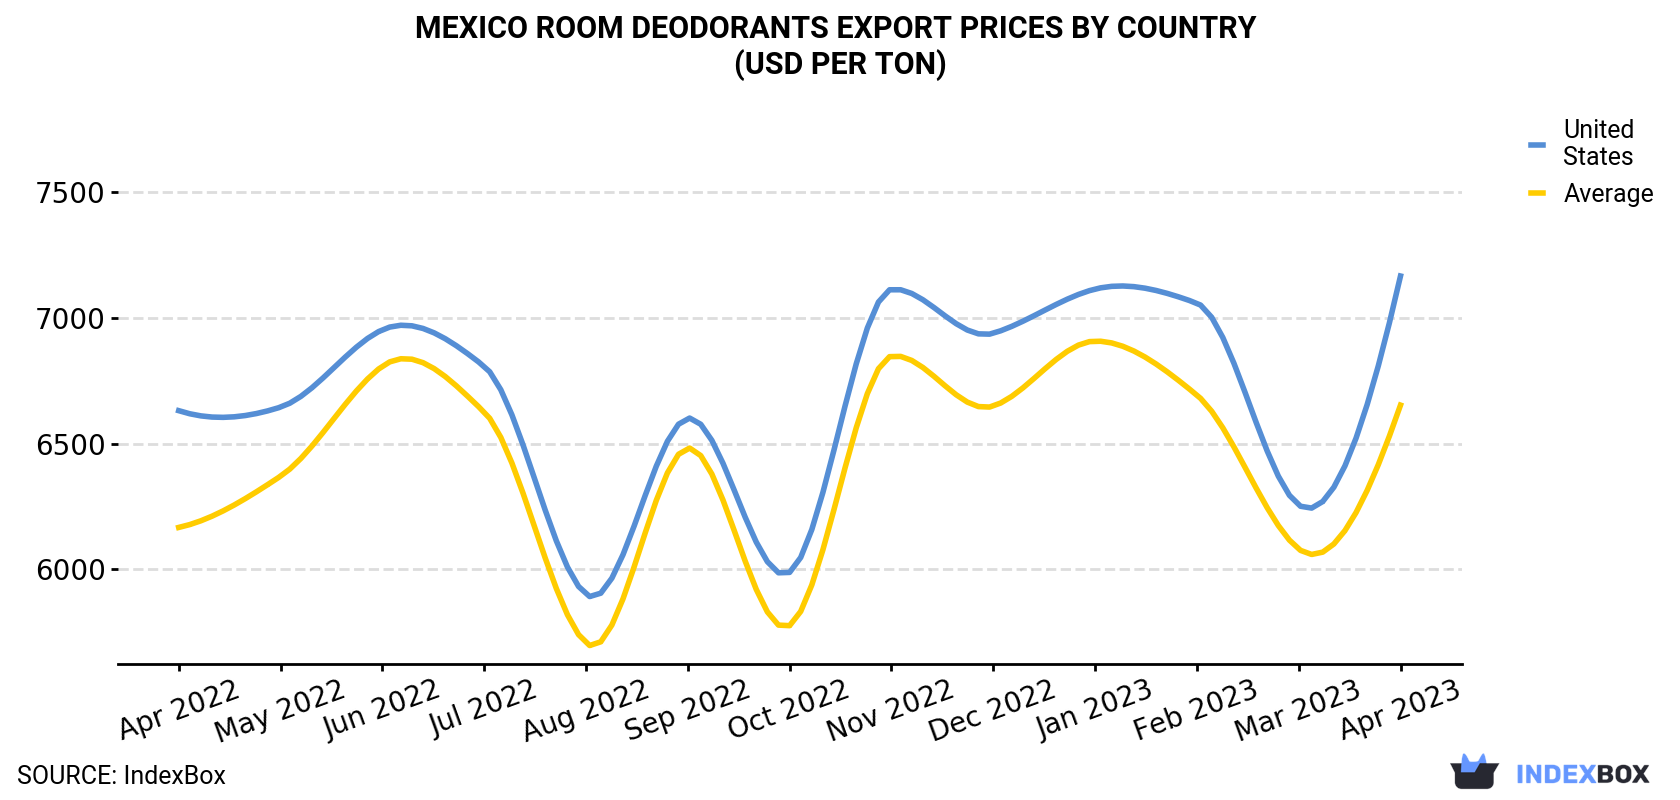 Mexico Room Deodorants Export Prices By Country (USD Per Ton)